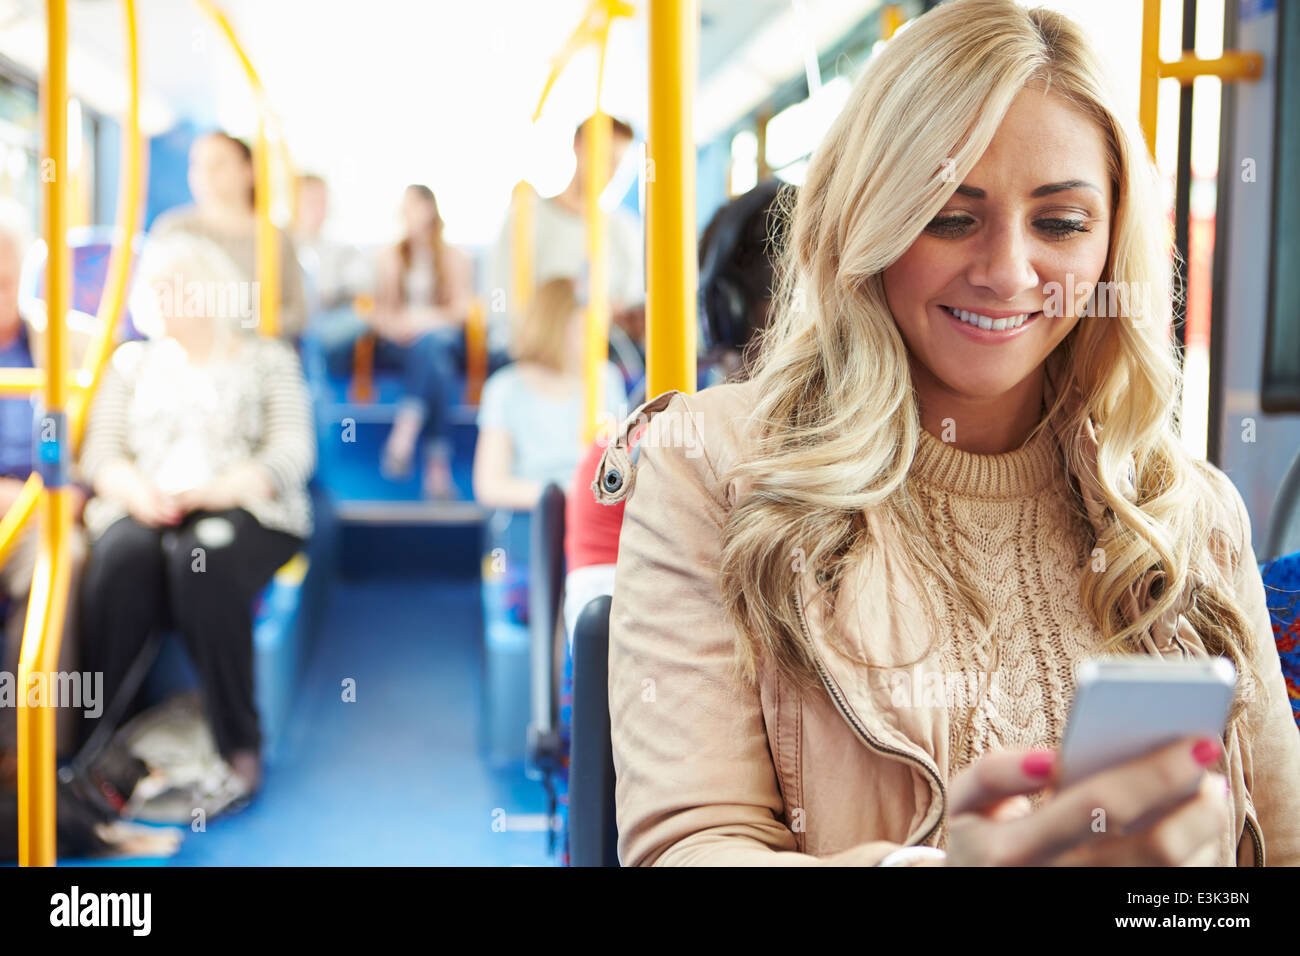 Woman Reading Text Message On Bus Stock Photo